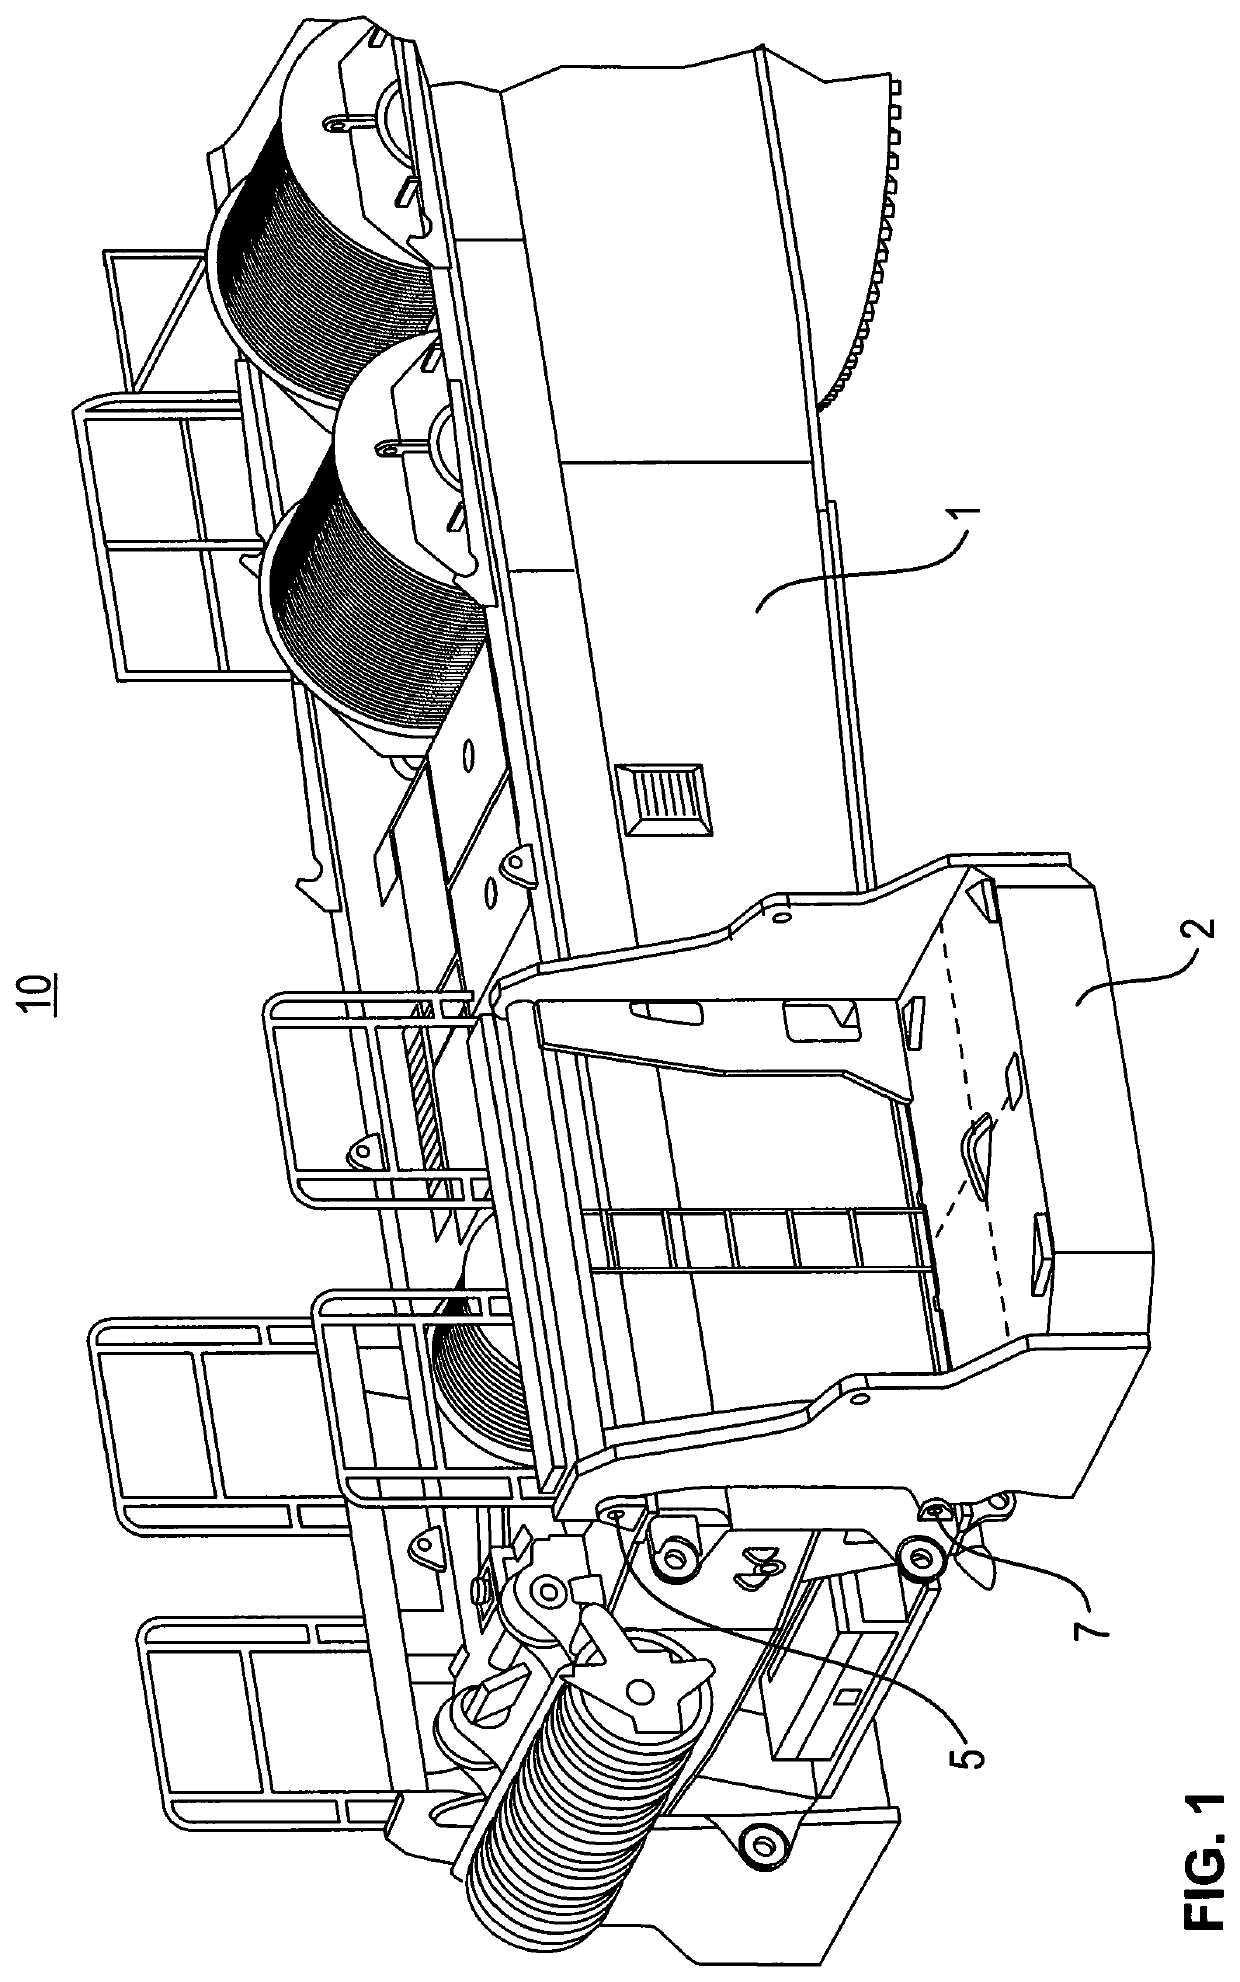 Crane having an apparatus for determining the effective counterweight of said crane